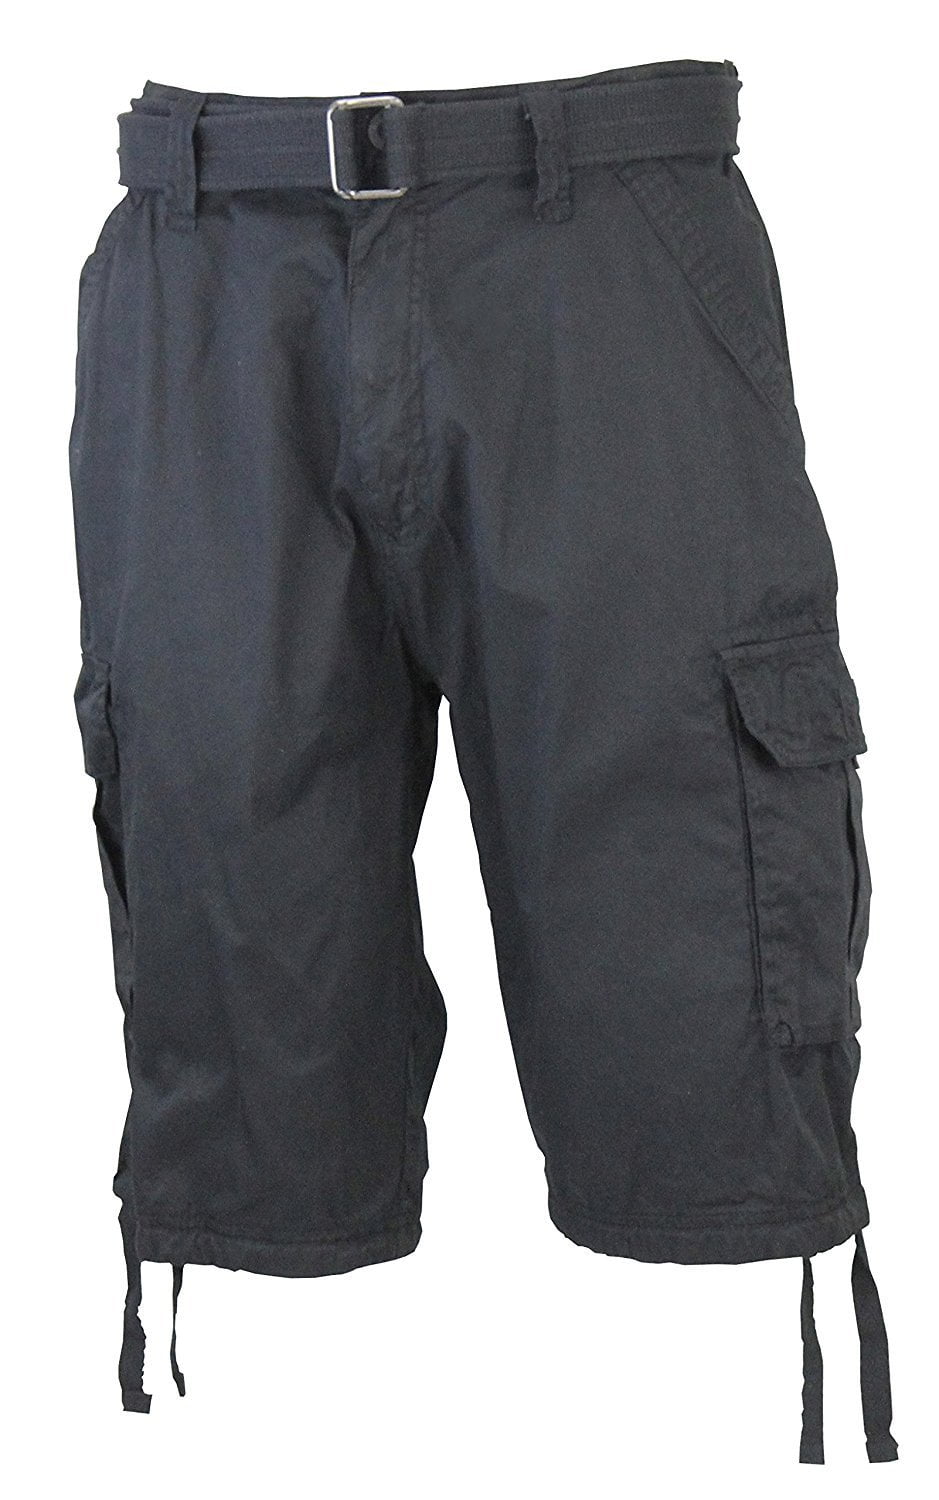 Men's Ablanche Navy Belted Cargo Shorts 